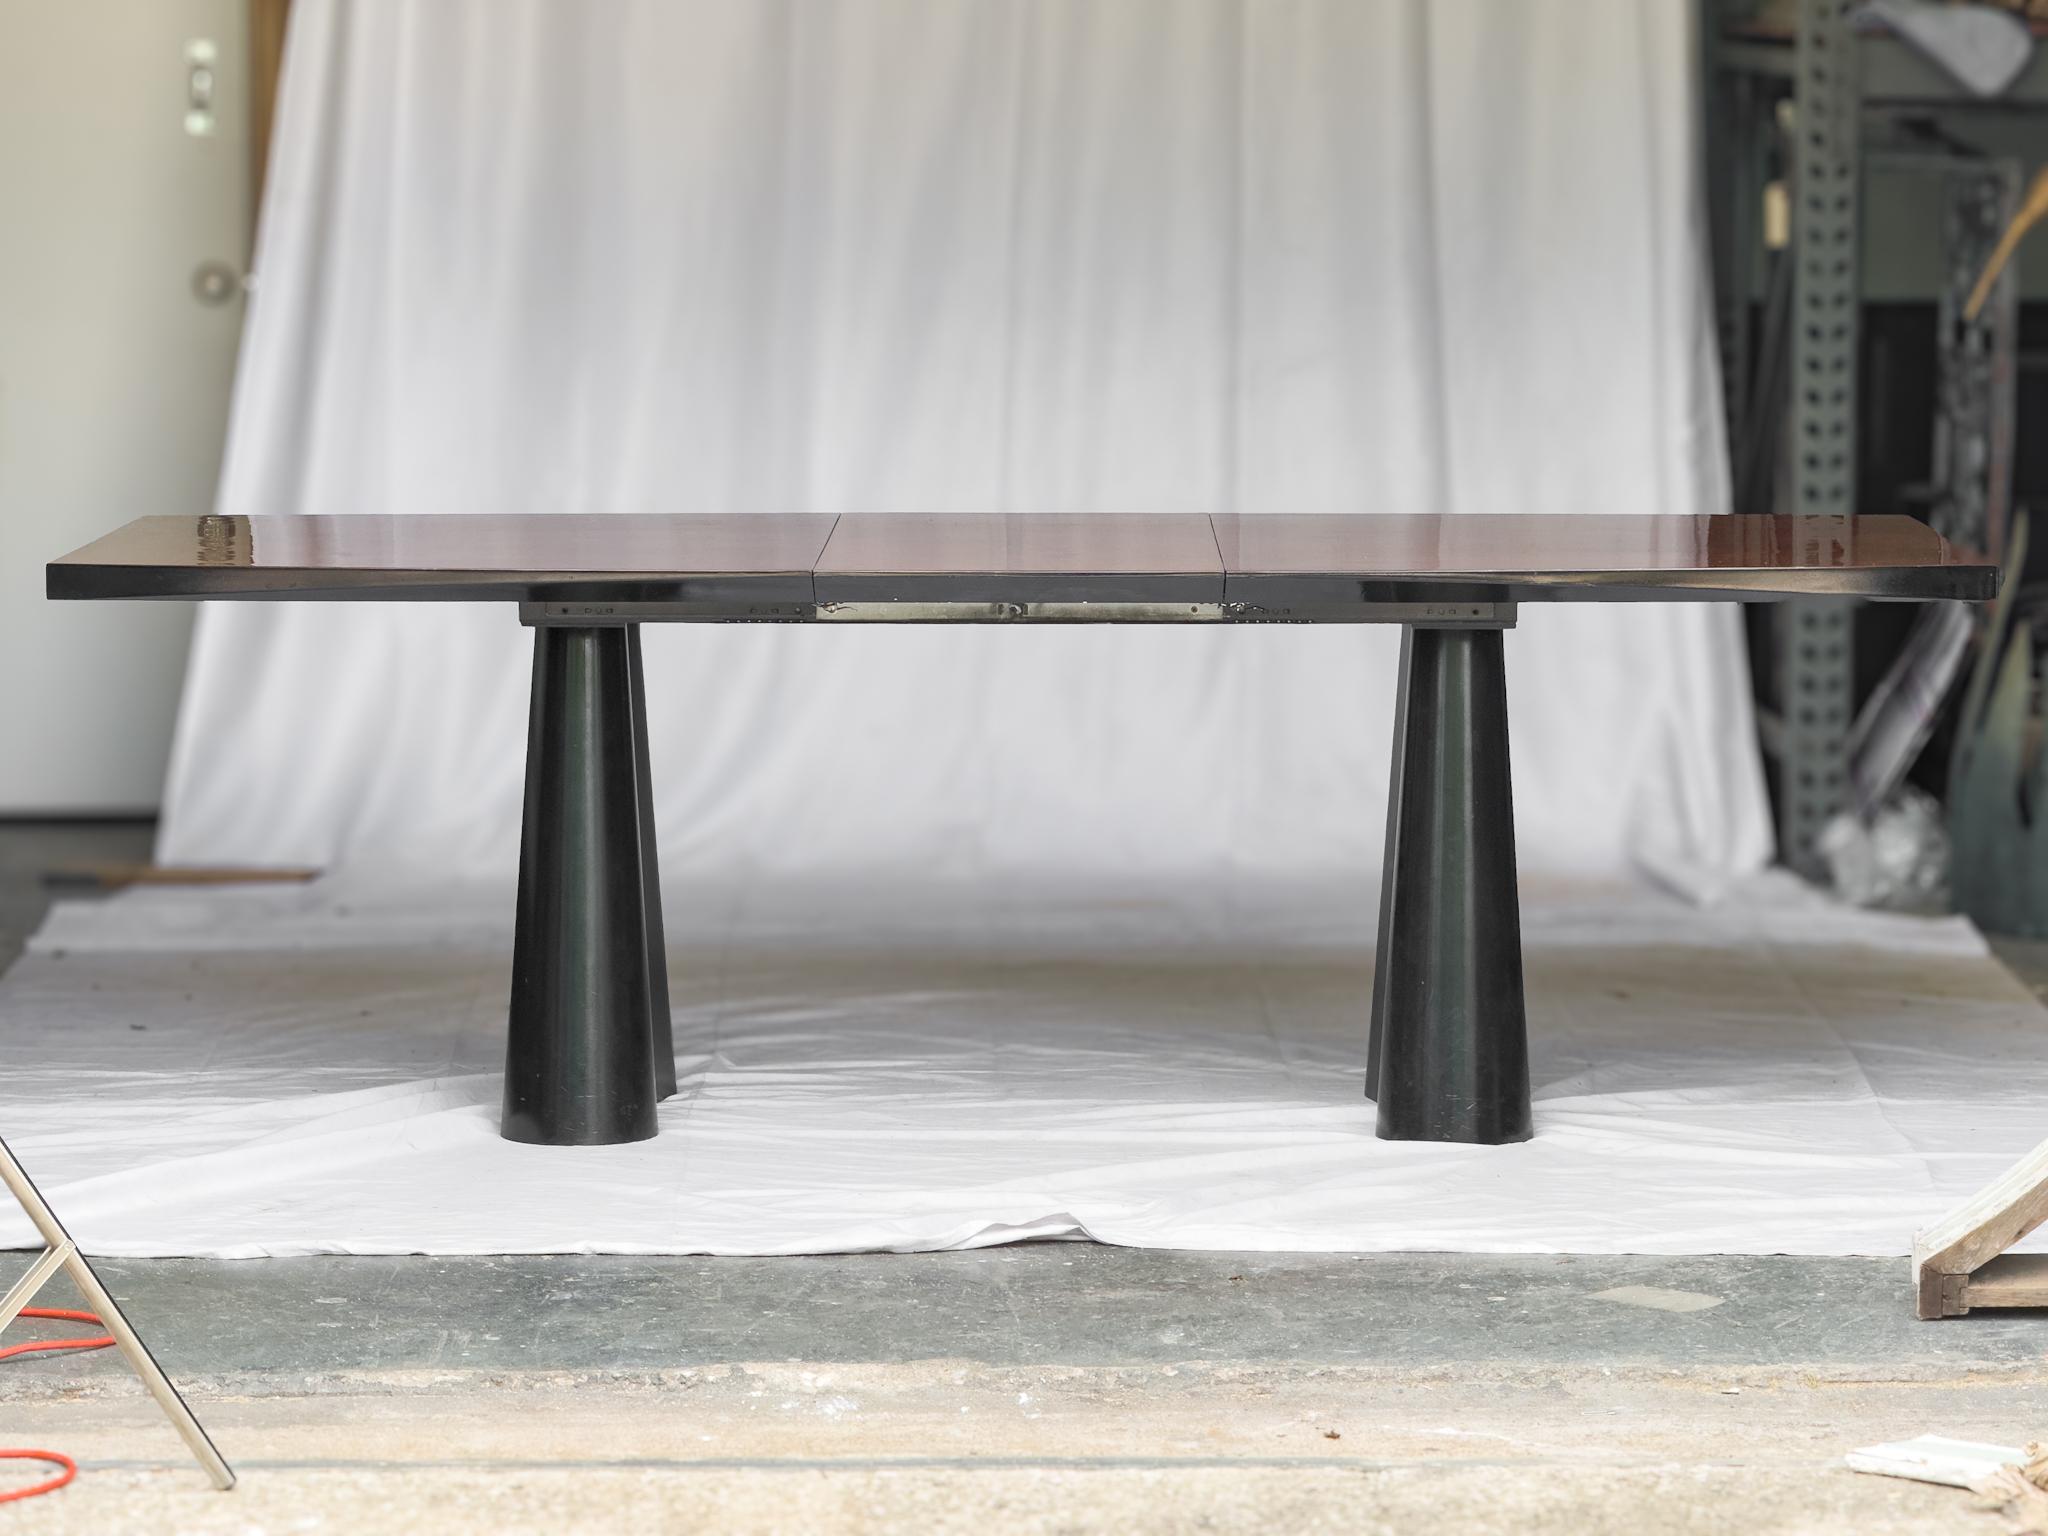 The Postmodern Burl and Lacquer Dining Table by Miniforms, an emblem of Italian craftsmanship, seamlessly merges elegance with functionality. Its striking design features exquisite book-matched wood, meticulously arranged to showcase the natural